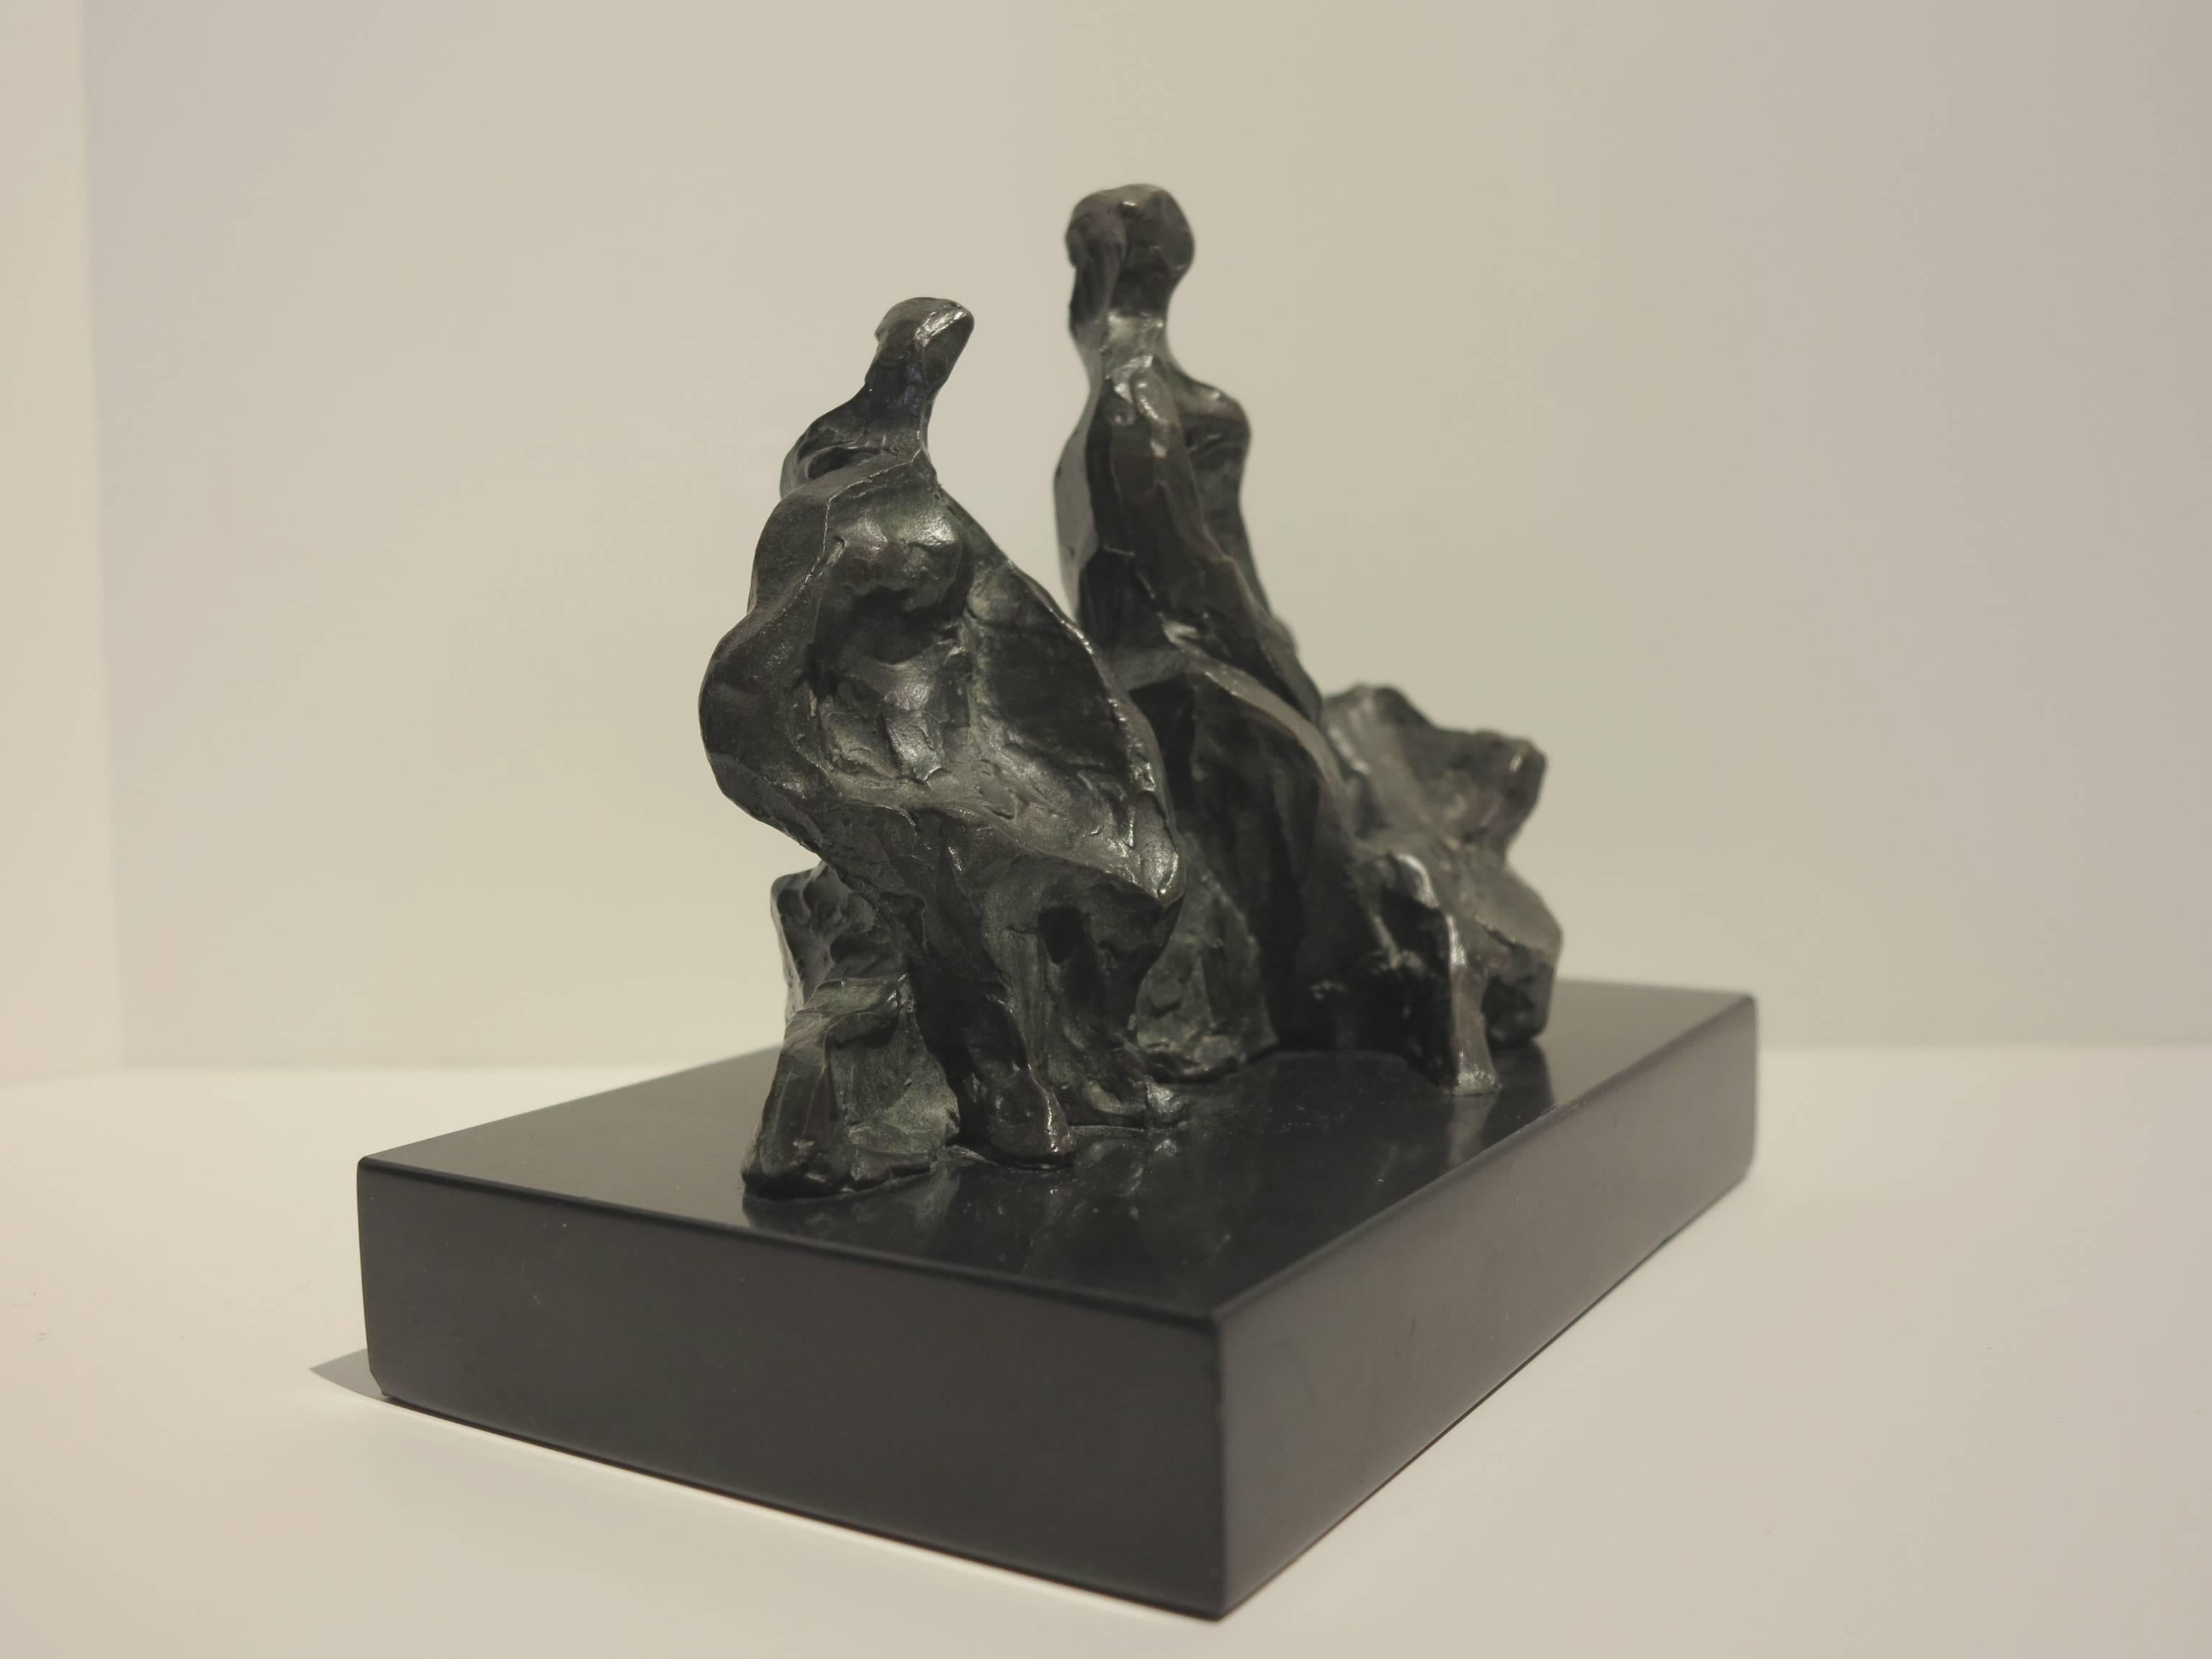 Elegant abstract figural study by American artist, Irving Marantz (1912-1972).  Three Figures in Repose, c.1950s. Bronze cast on onyx stone base. Cast measurement: length: 7 inches; height: 5.25 inches; depth: 4 inches. Base measures 5 x 8 x 1.25